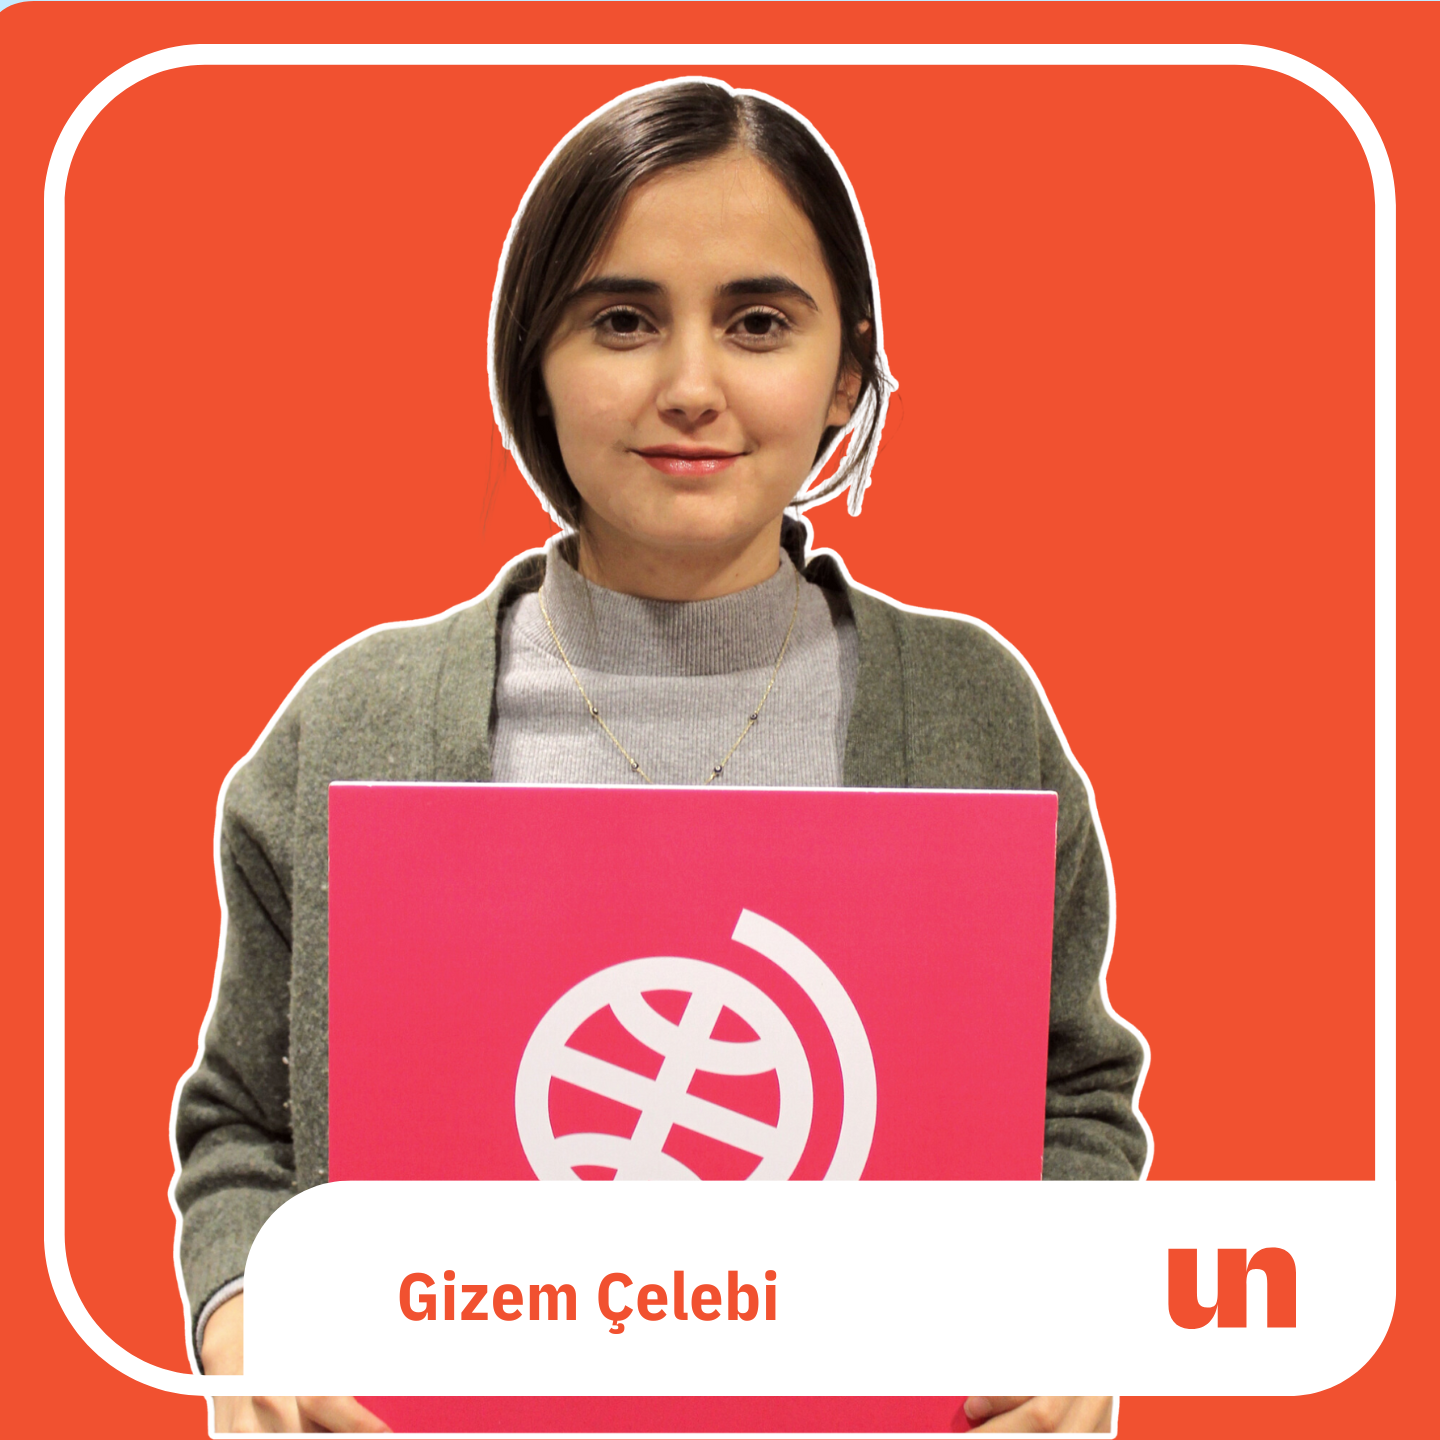 CLICK AND READ MORE ABOUT GIZEM